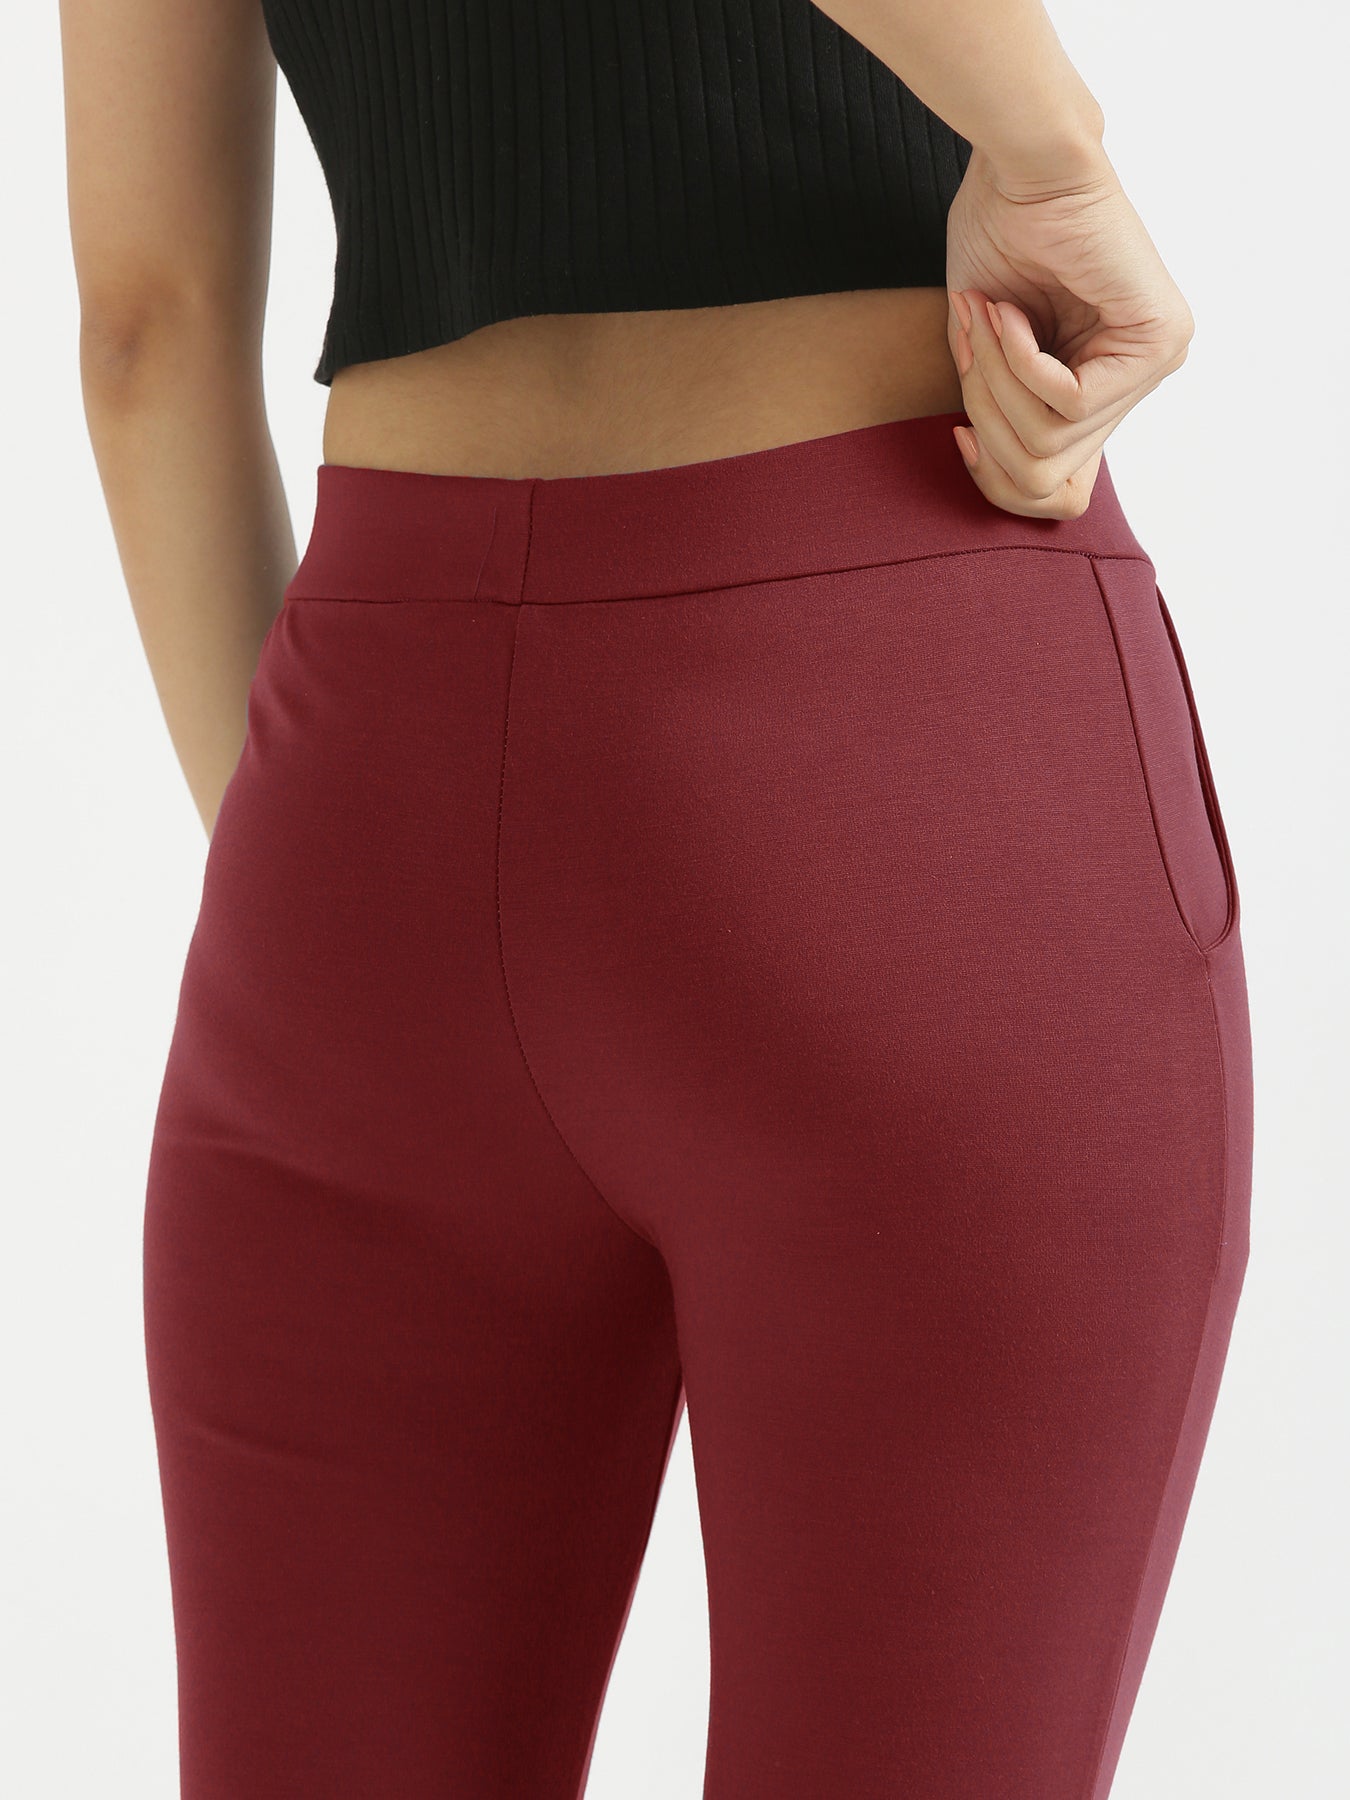 Maroon Coloured Premium Polyester Lycra Stretchable And Sweat Free  Ultrasoft Comfortable Women Yoga Pants!! - SR CREATION at Rs 548.00,  Bengaluru